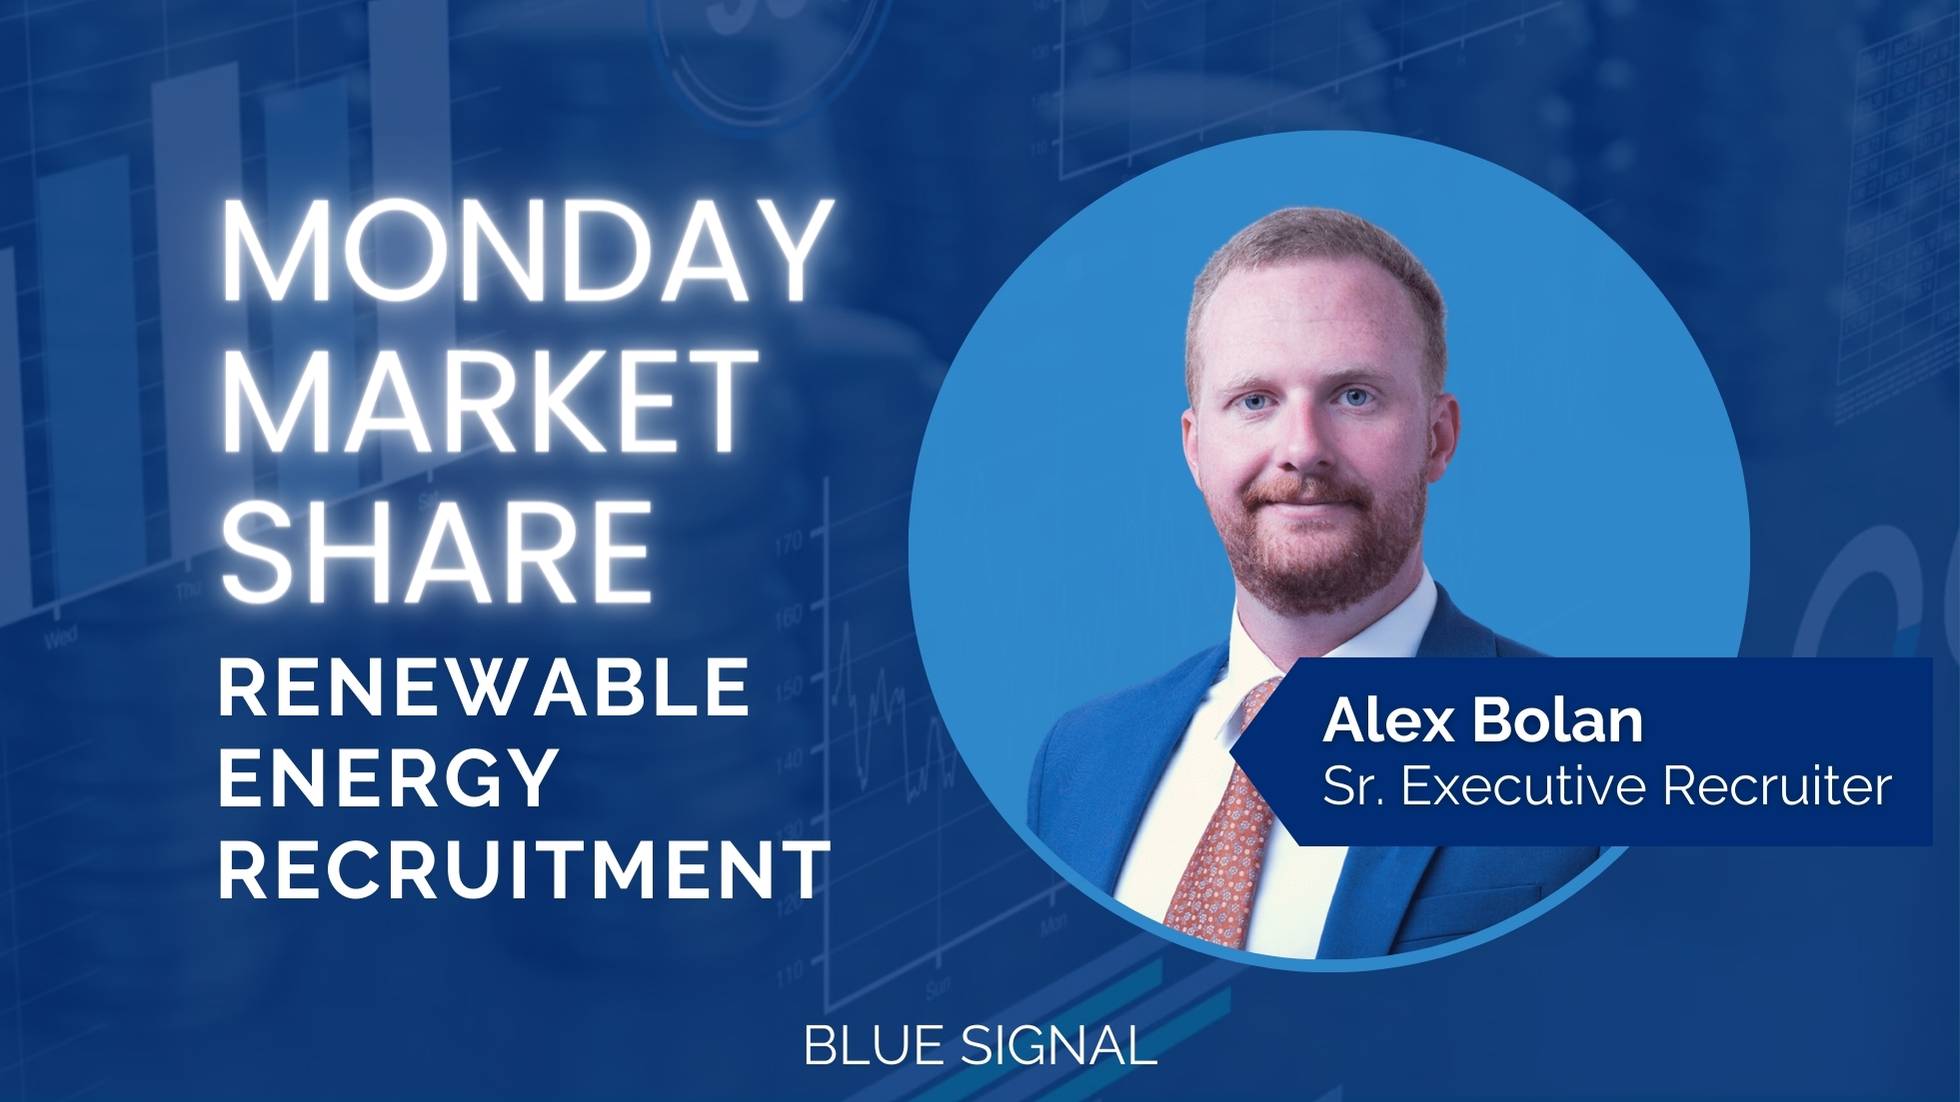 Monday Market Share blog banner featuring the renewable energy industry and Sr. Executive Recruiter, Alex Bolan.